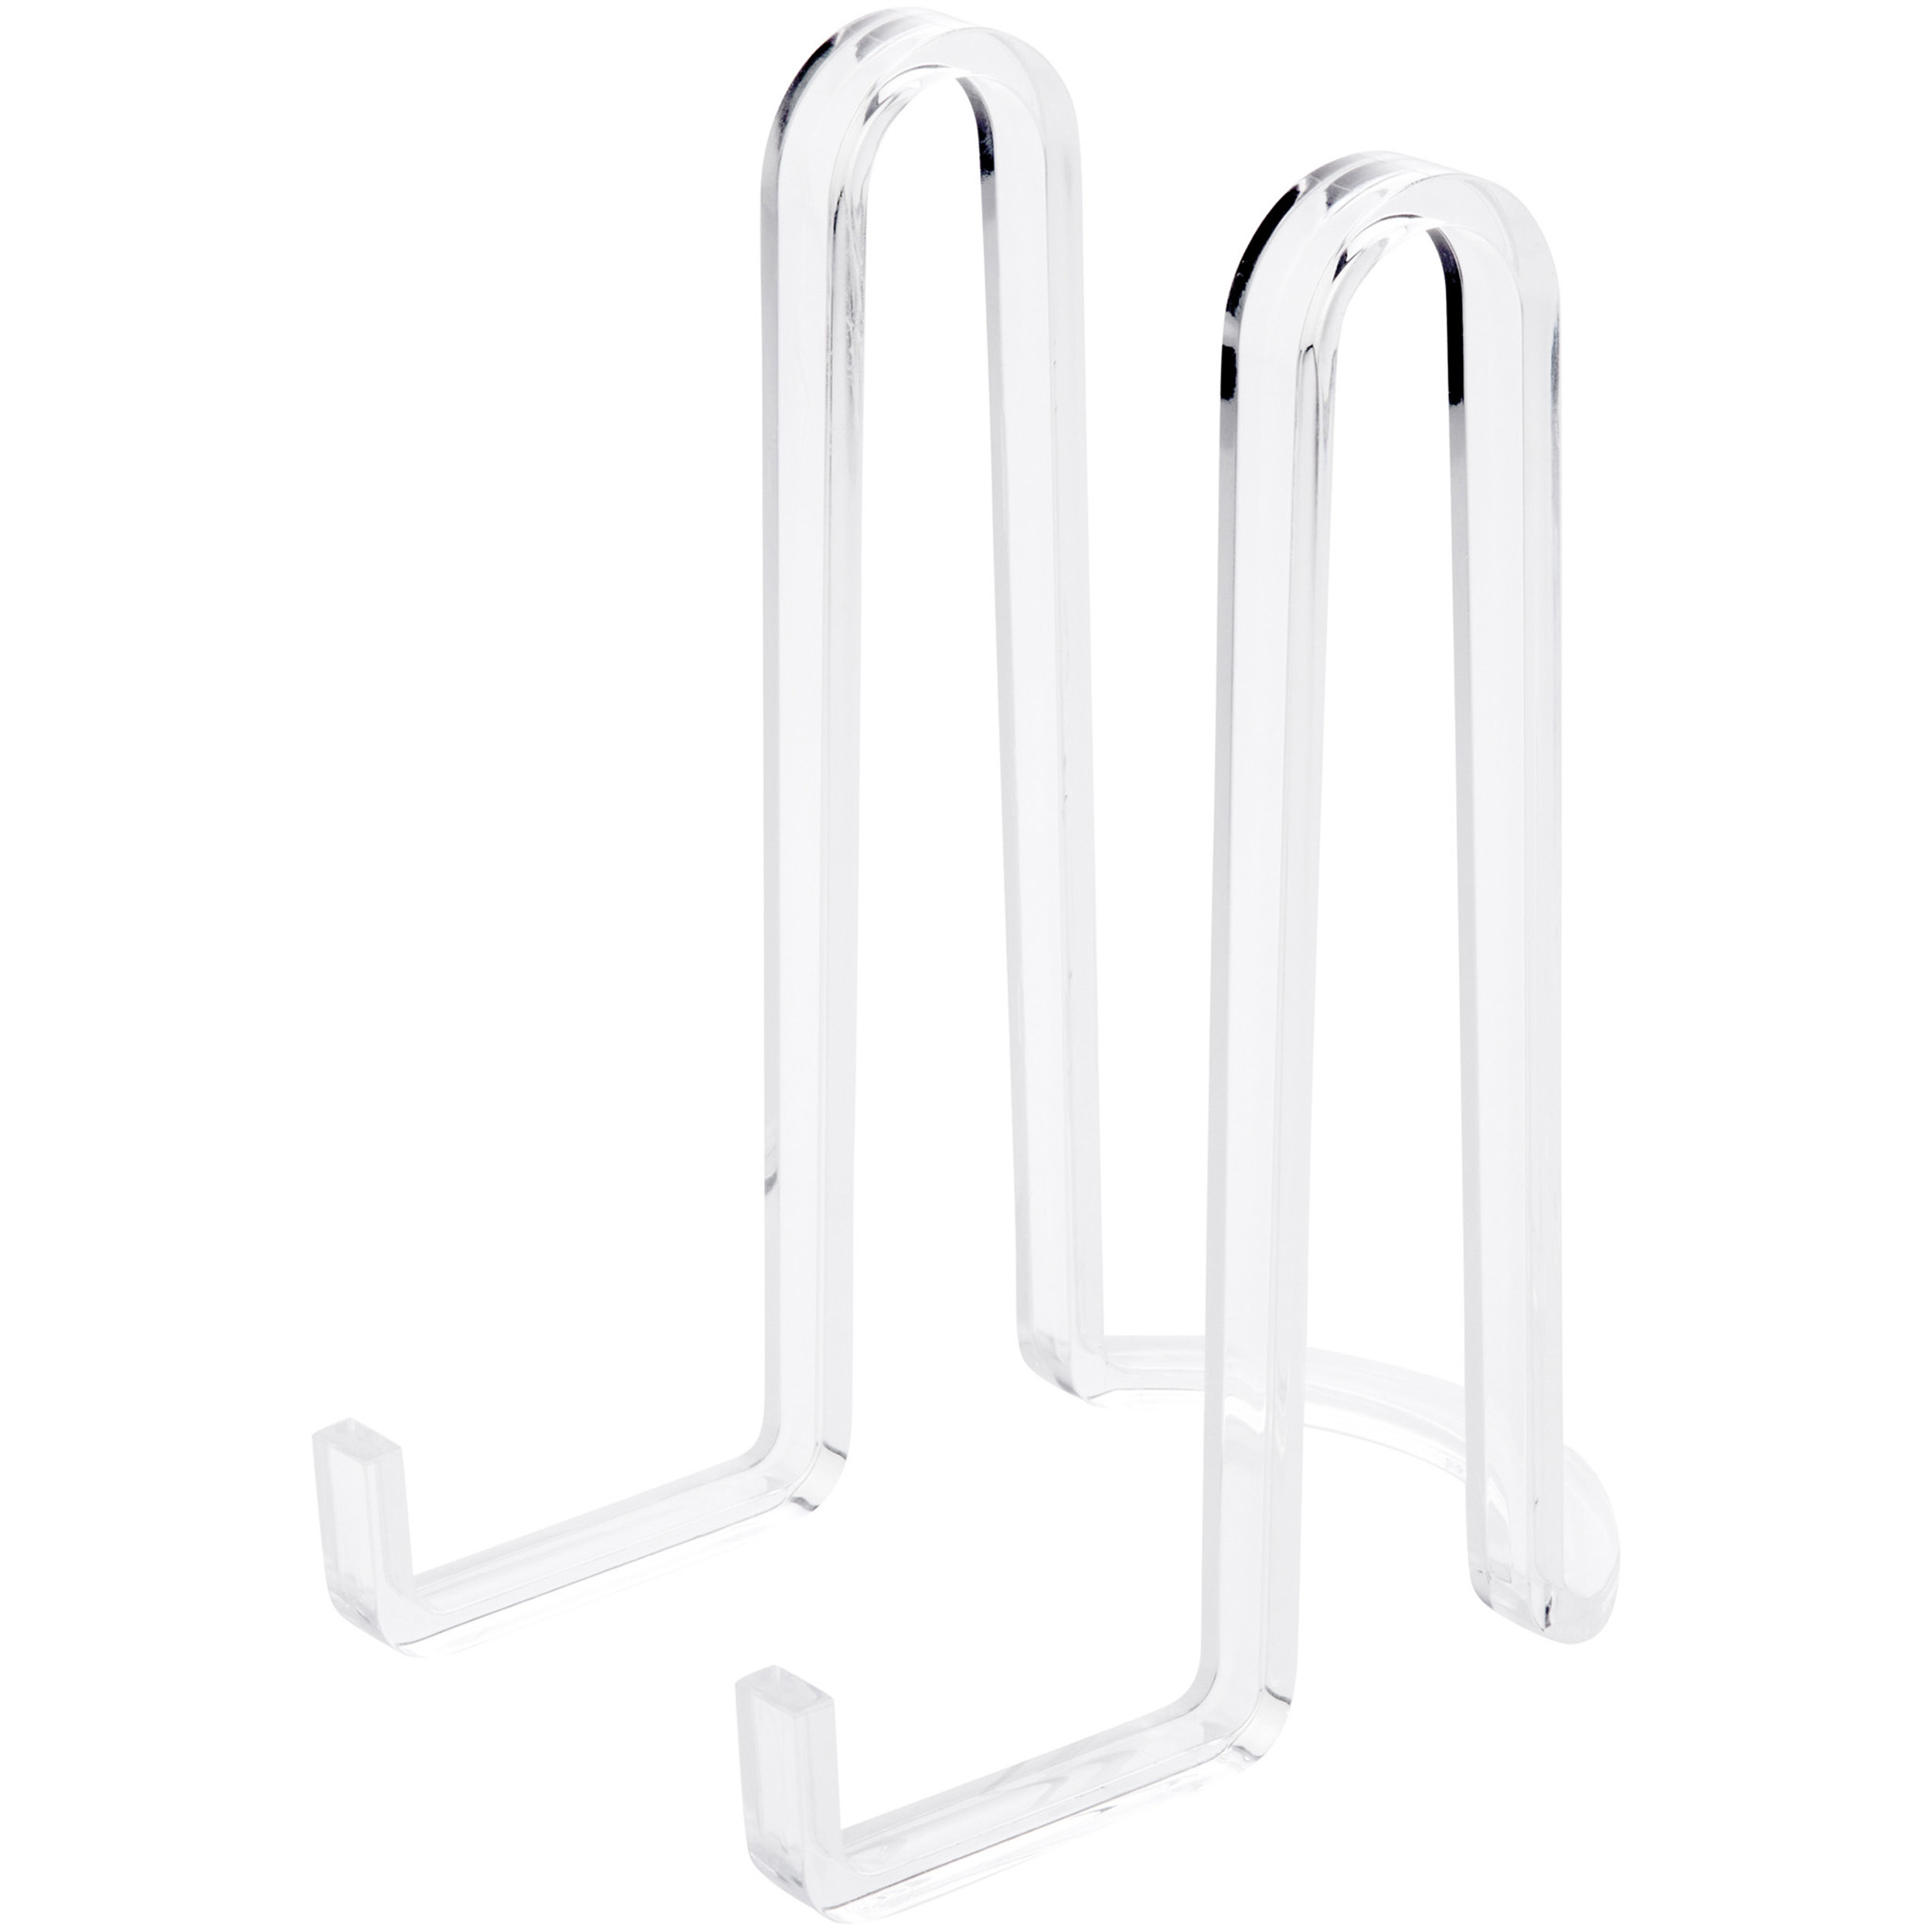 Plymor Clear Acrylic Ribbon-Style Display Easel, 7.5" H x 4" W x 6" D (24 Pack) - image 1 of 1